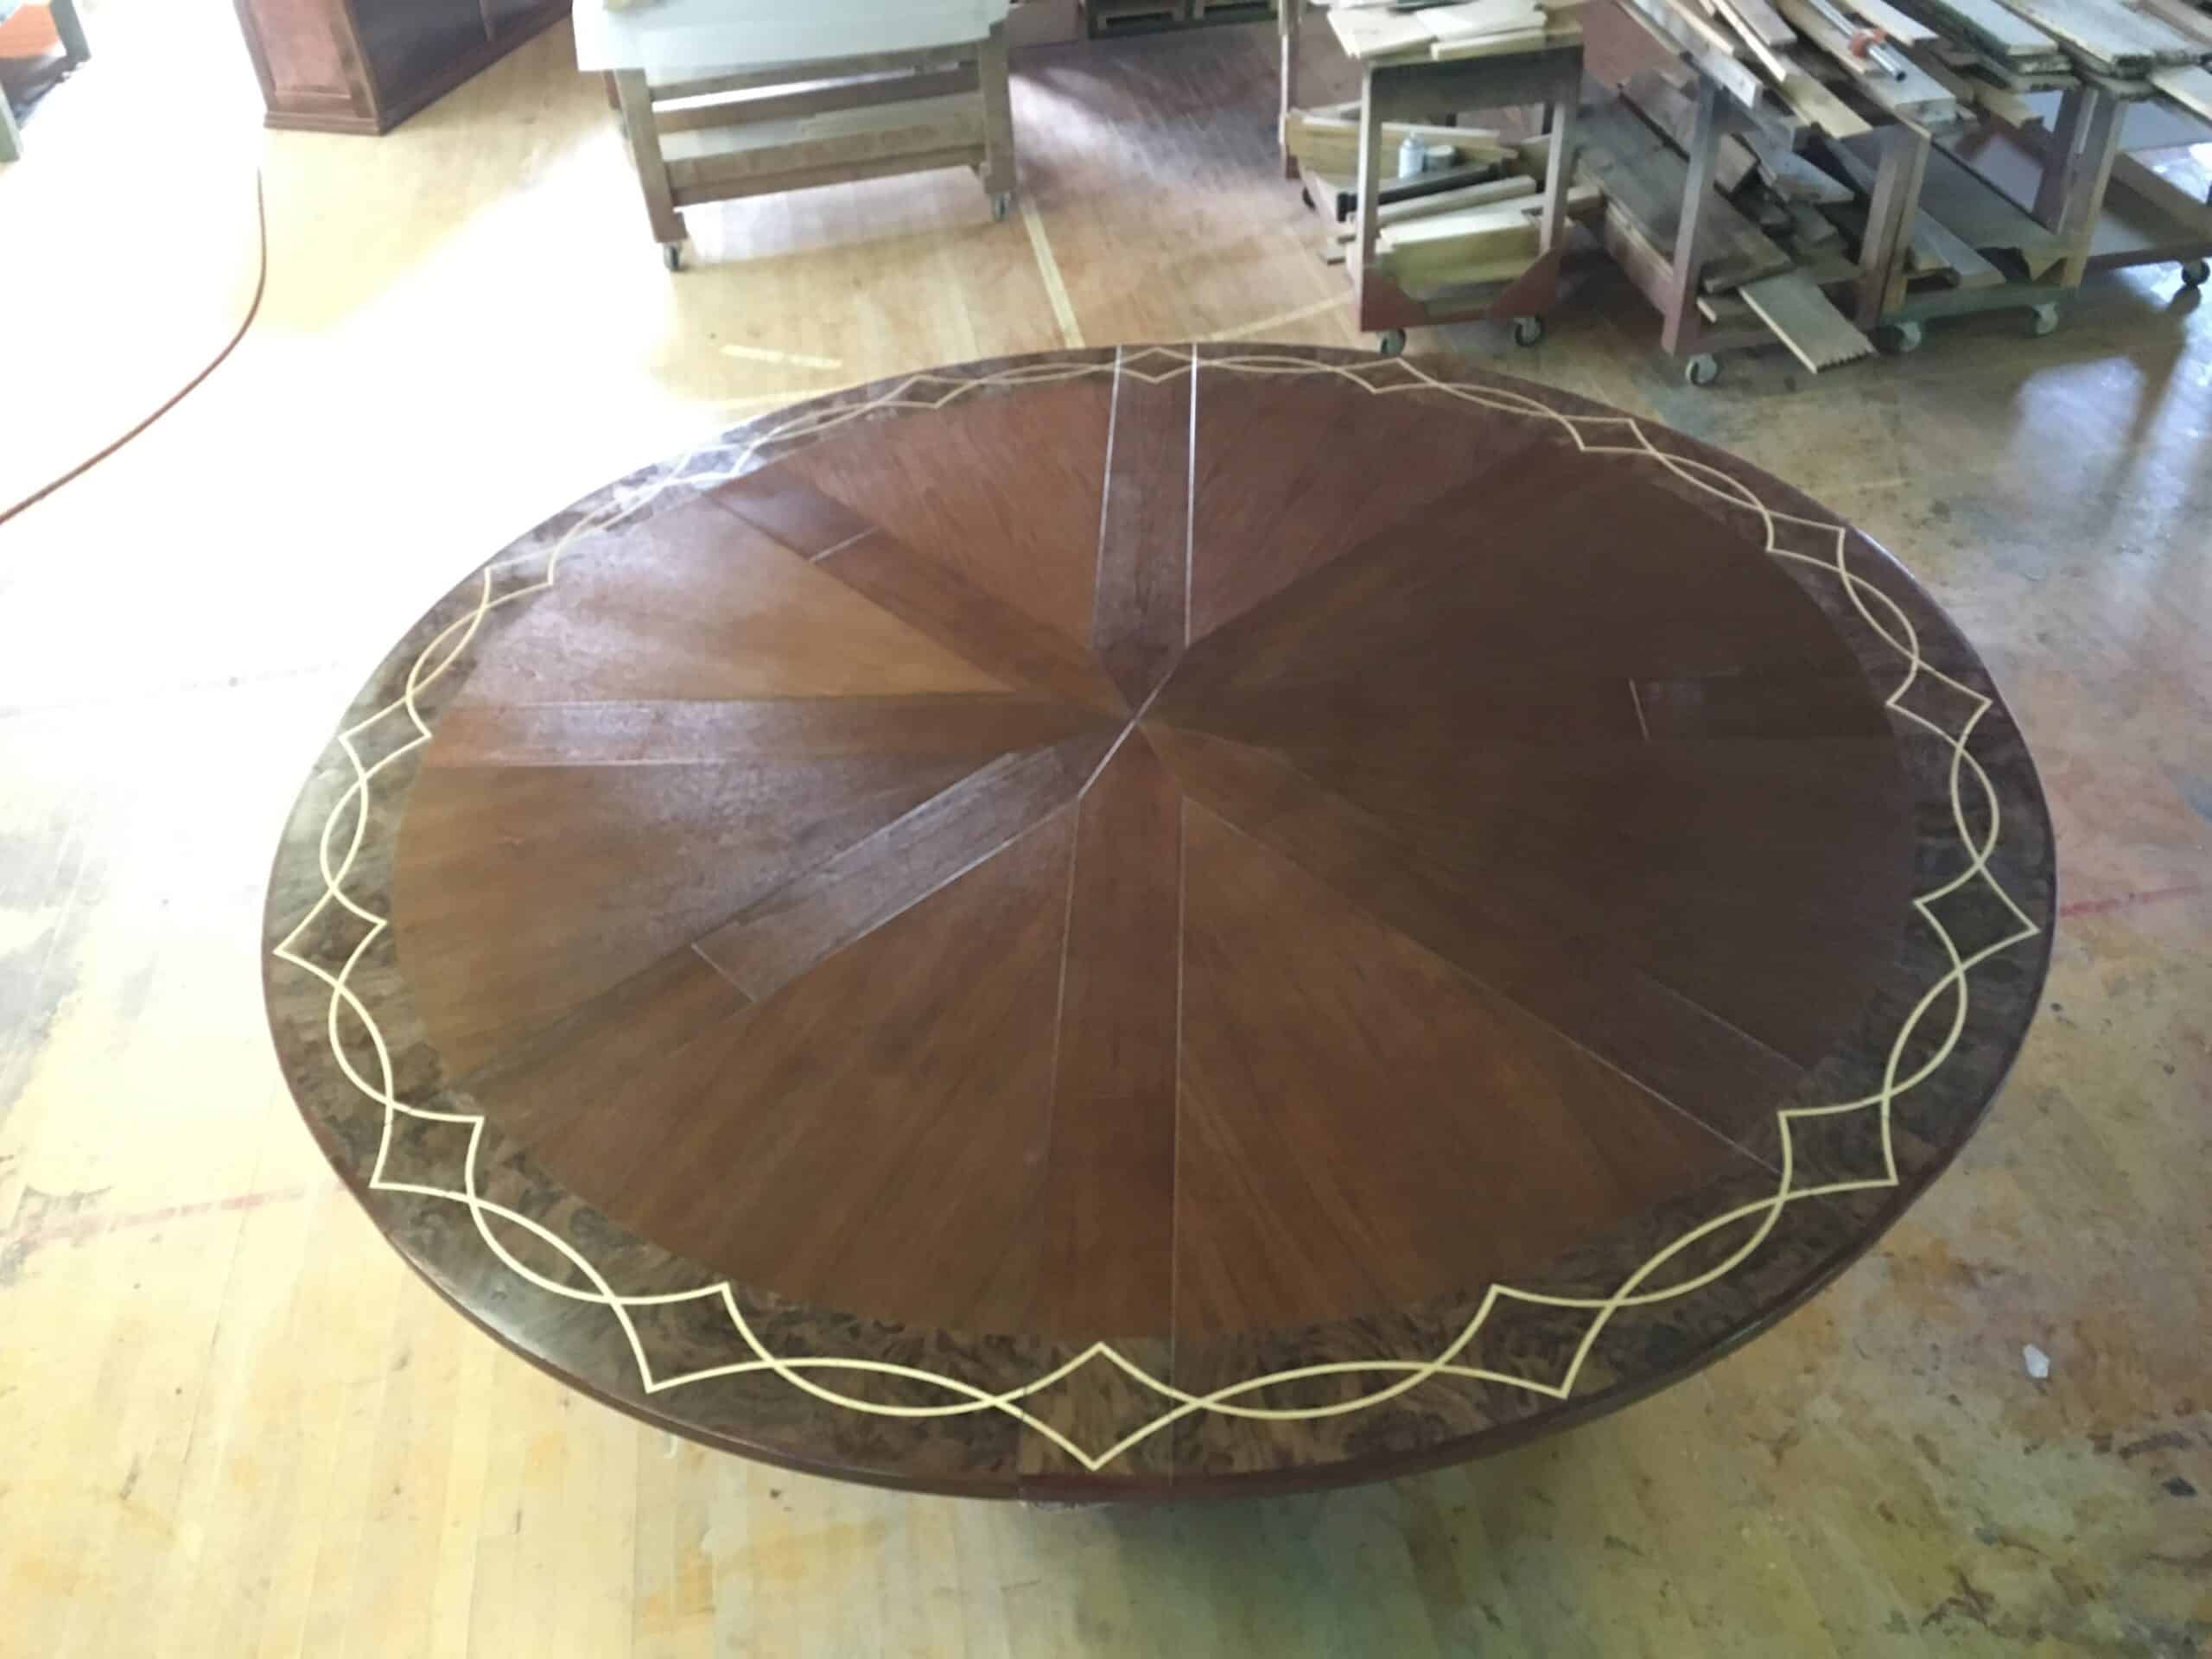 8 Leaf Expanding Round Table Expanded Top View - Coastal